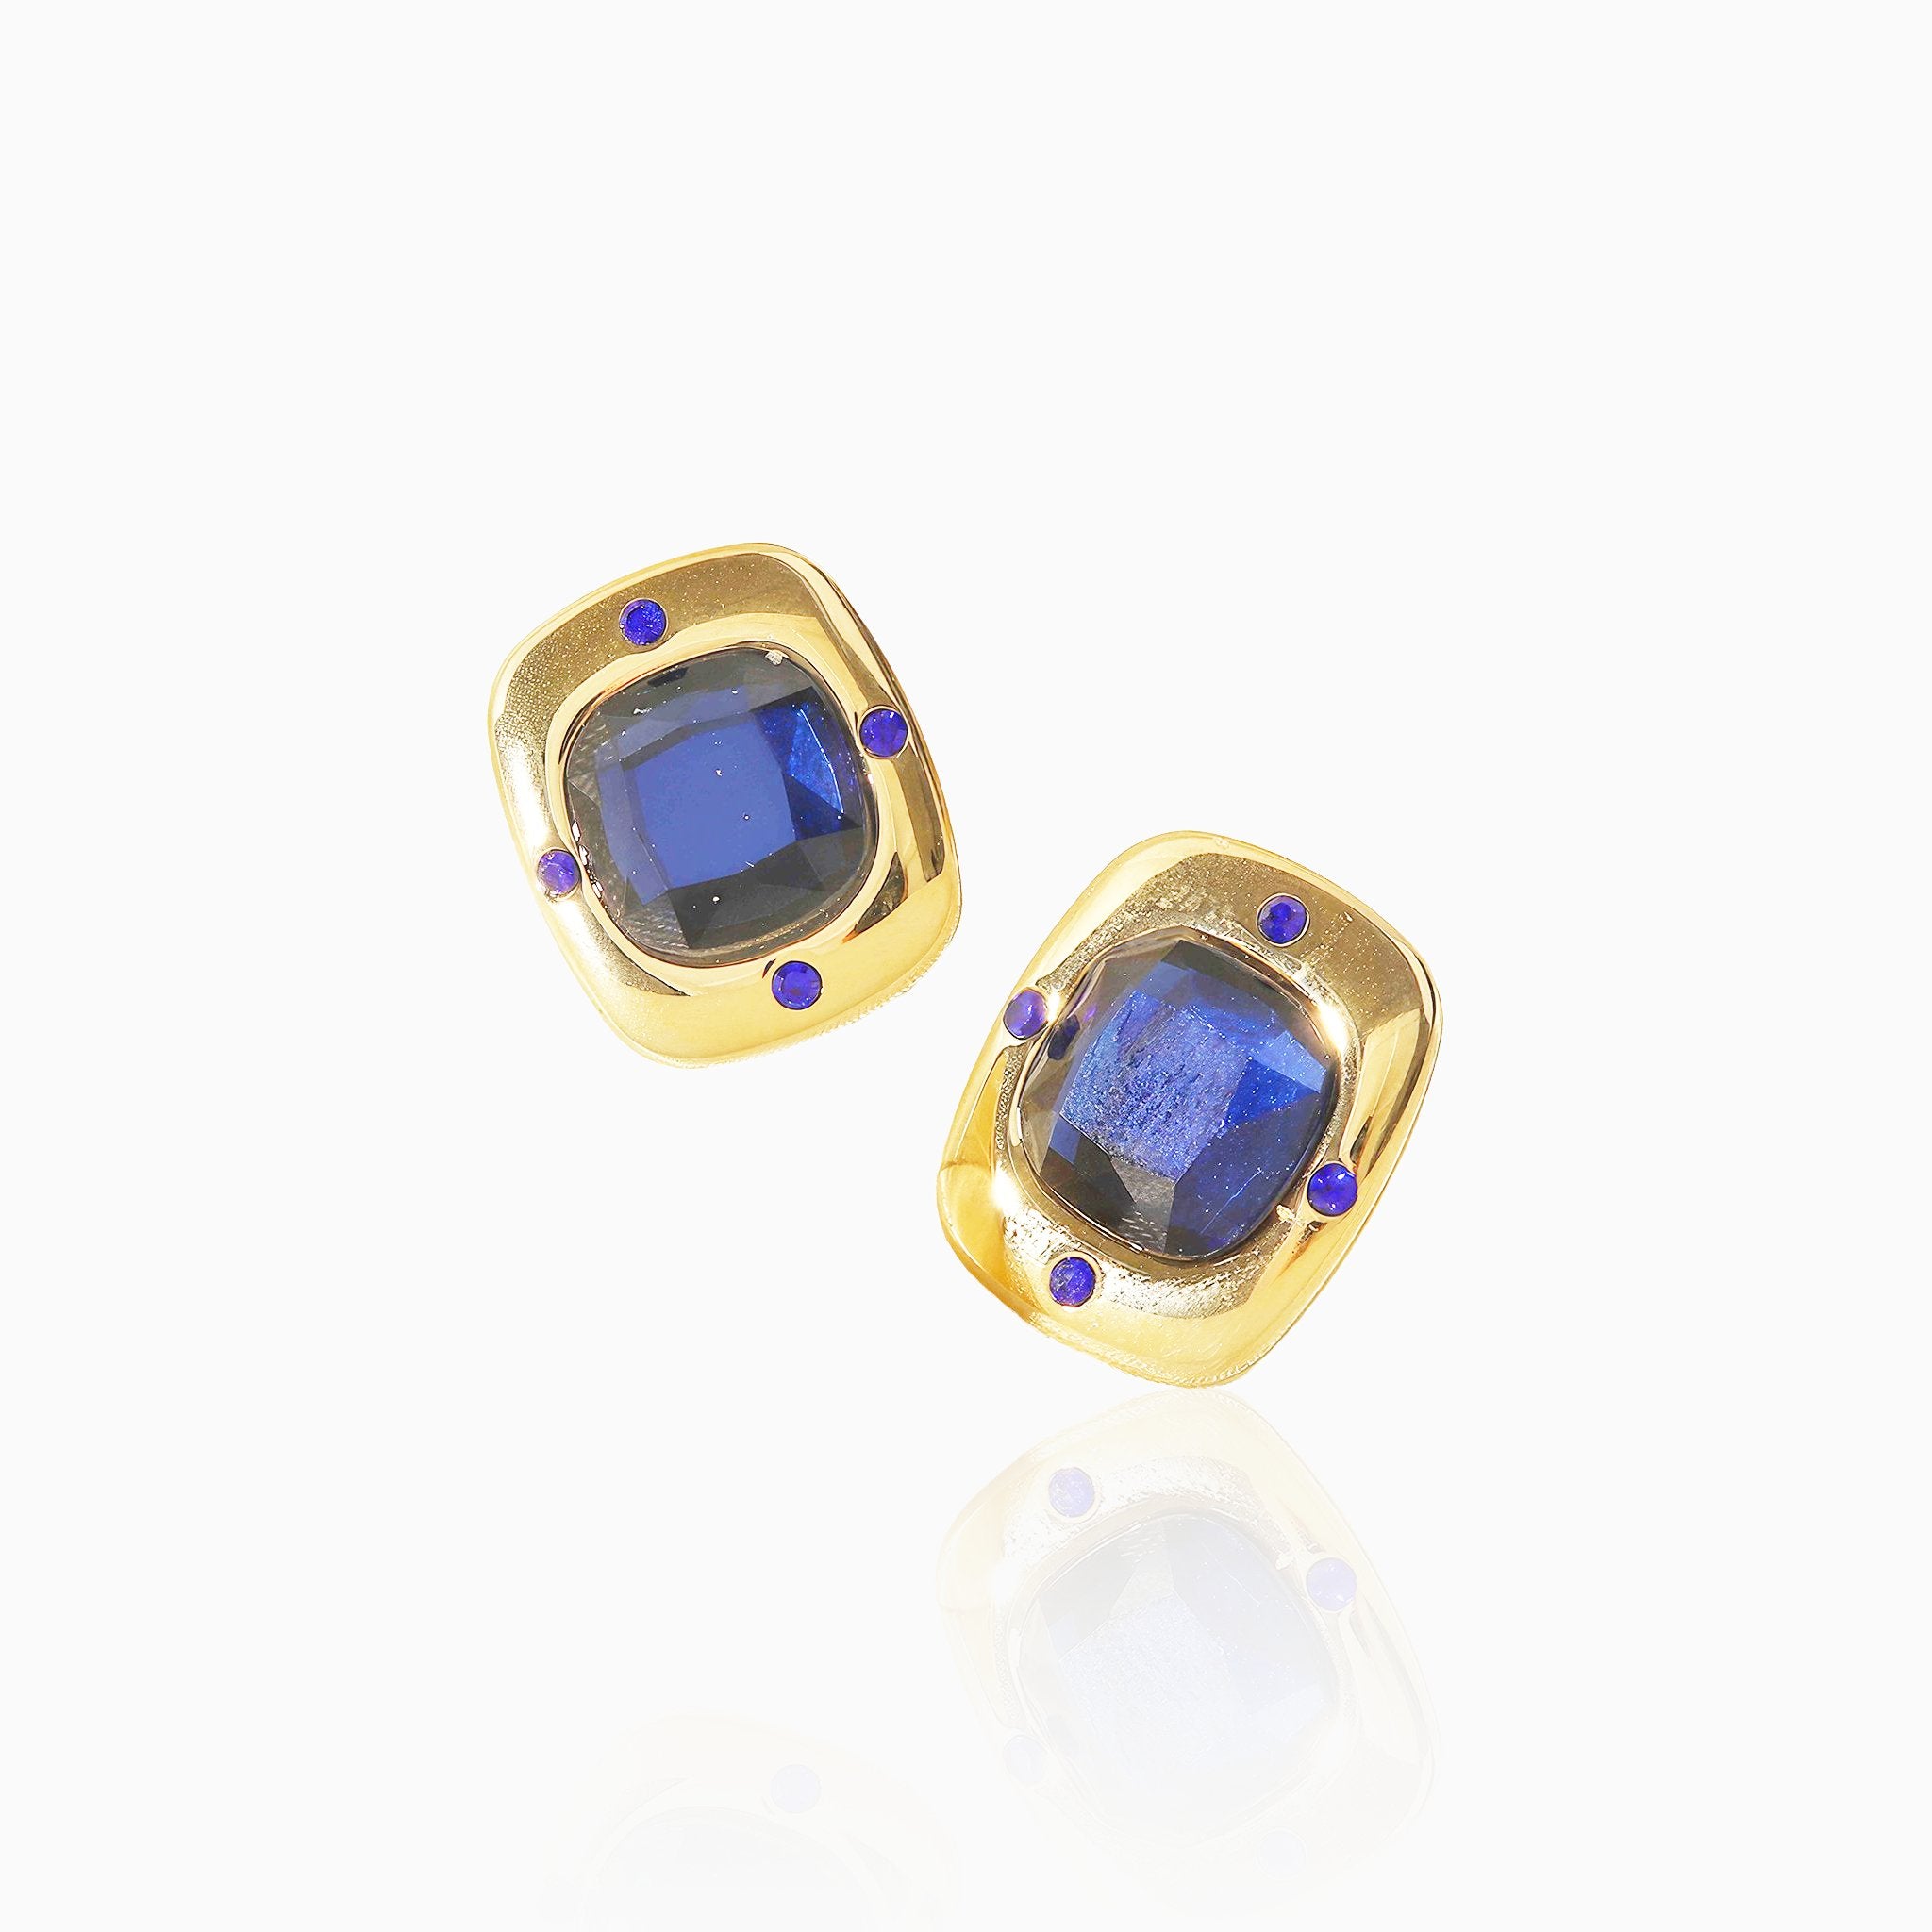 Square Earrings with Royal Blue Gemstones - Nobbier - Earrings - 18K Gold And Titanium PVD Coated Jewelry